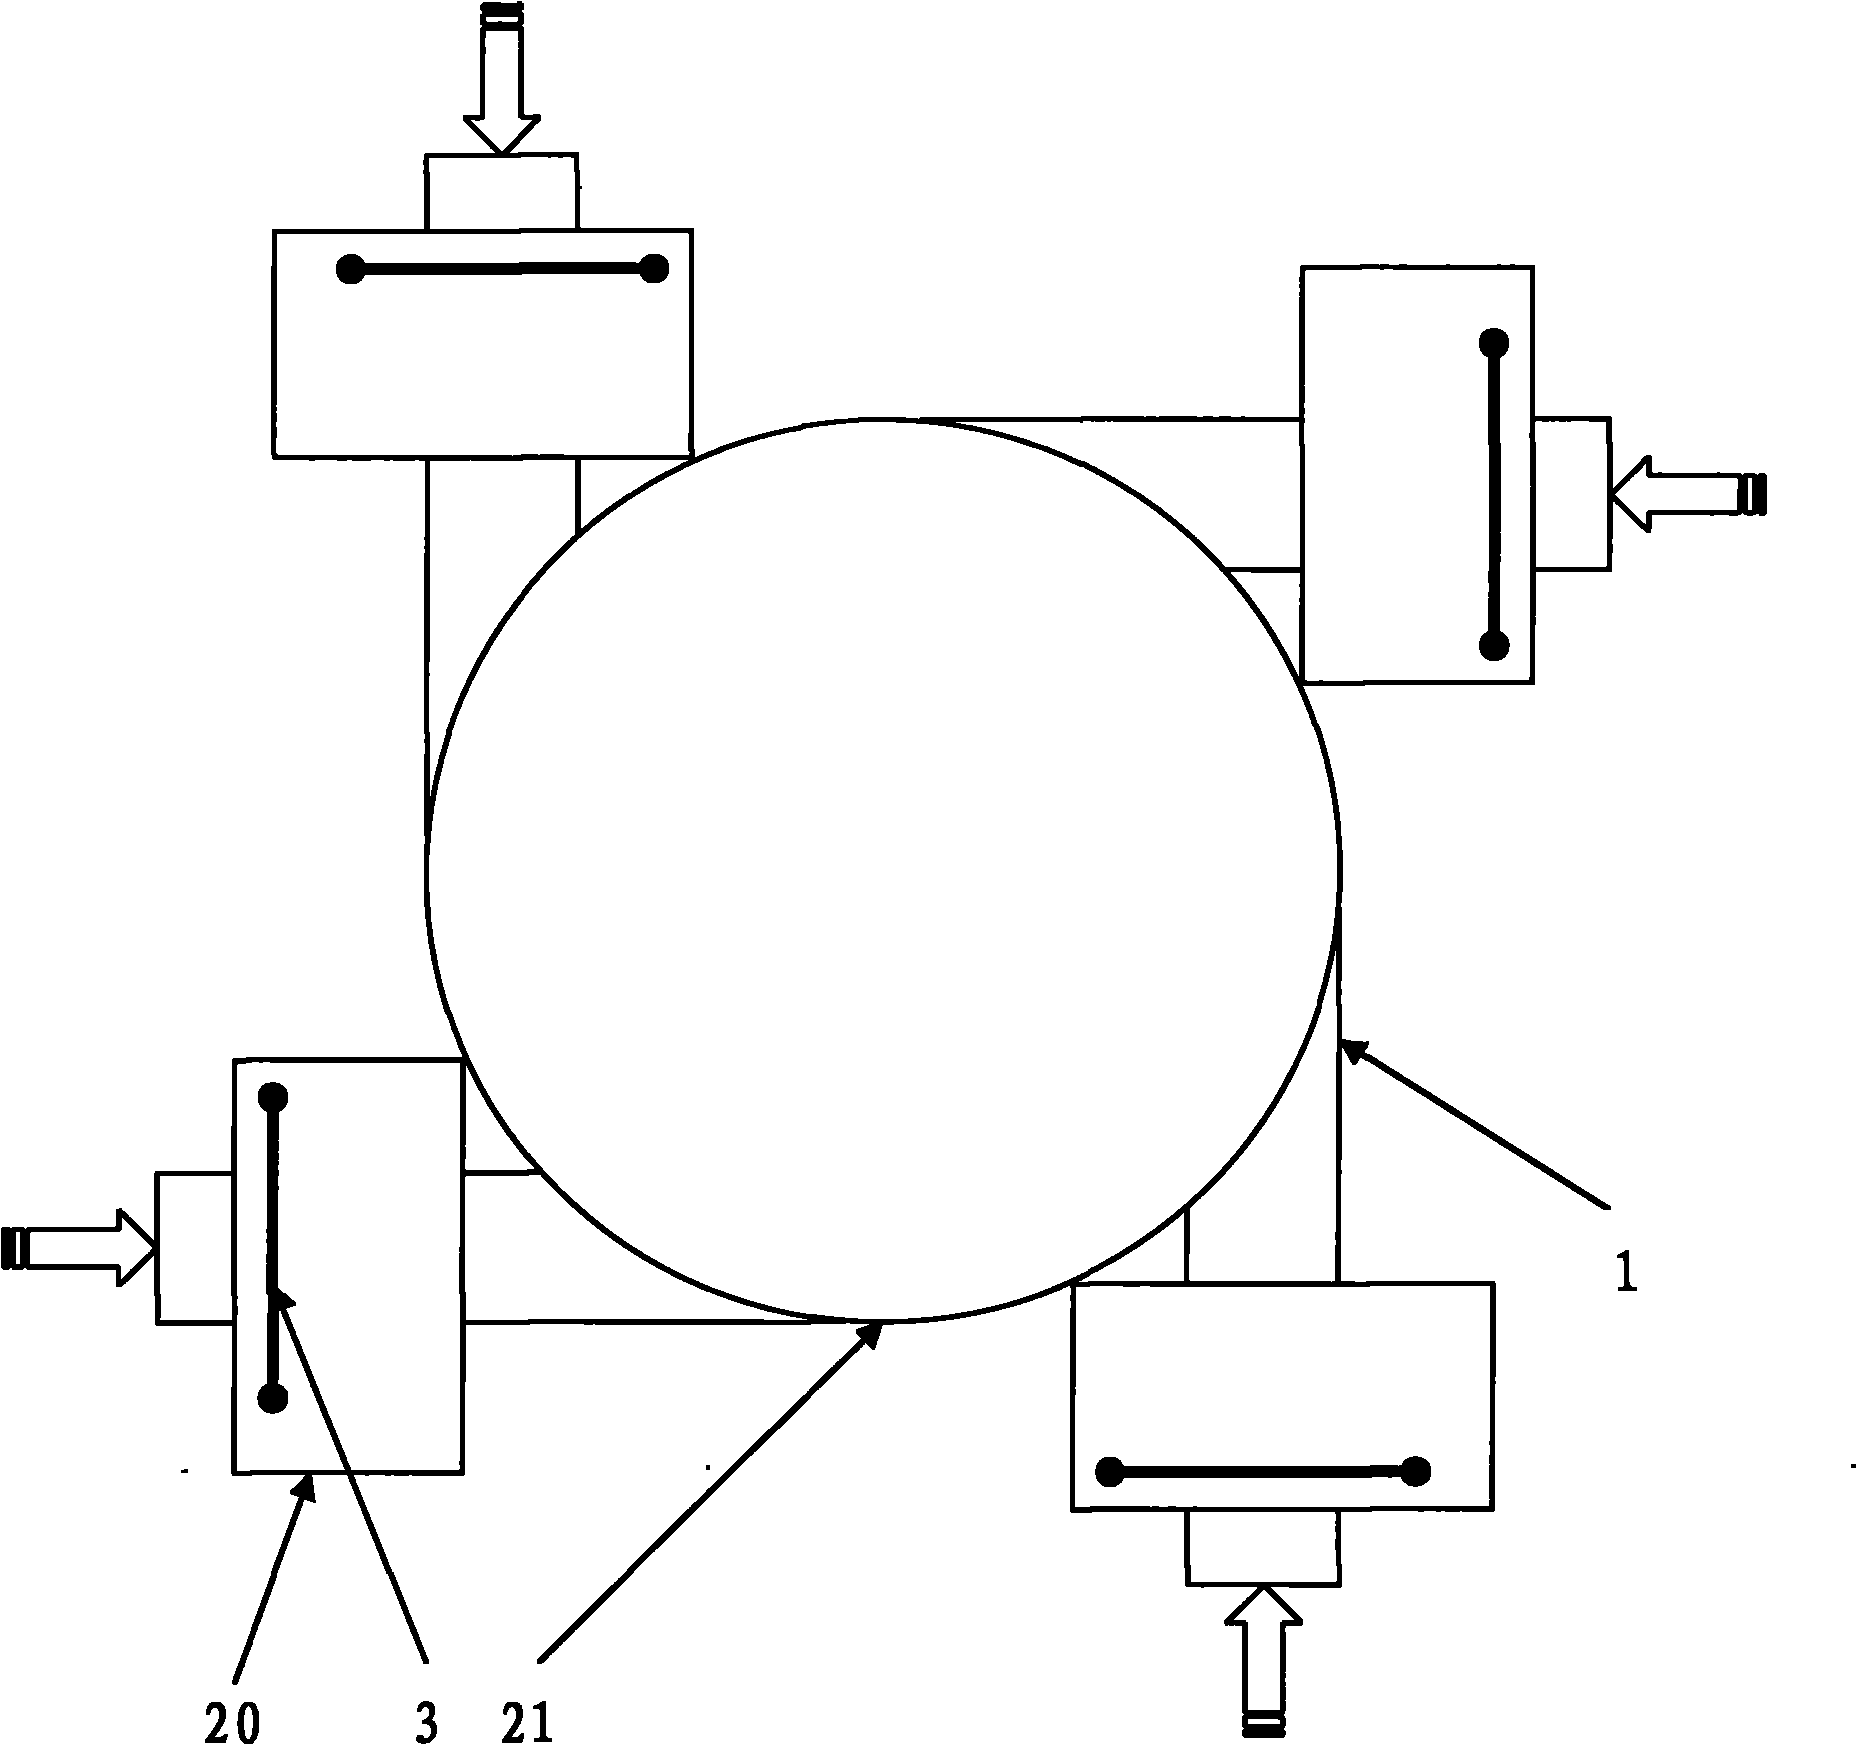 Waste gas central treating system